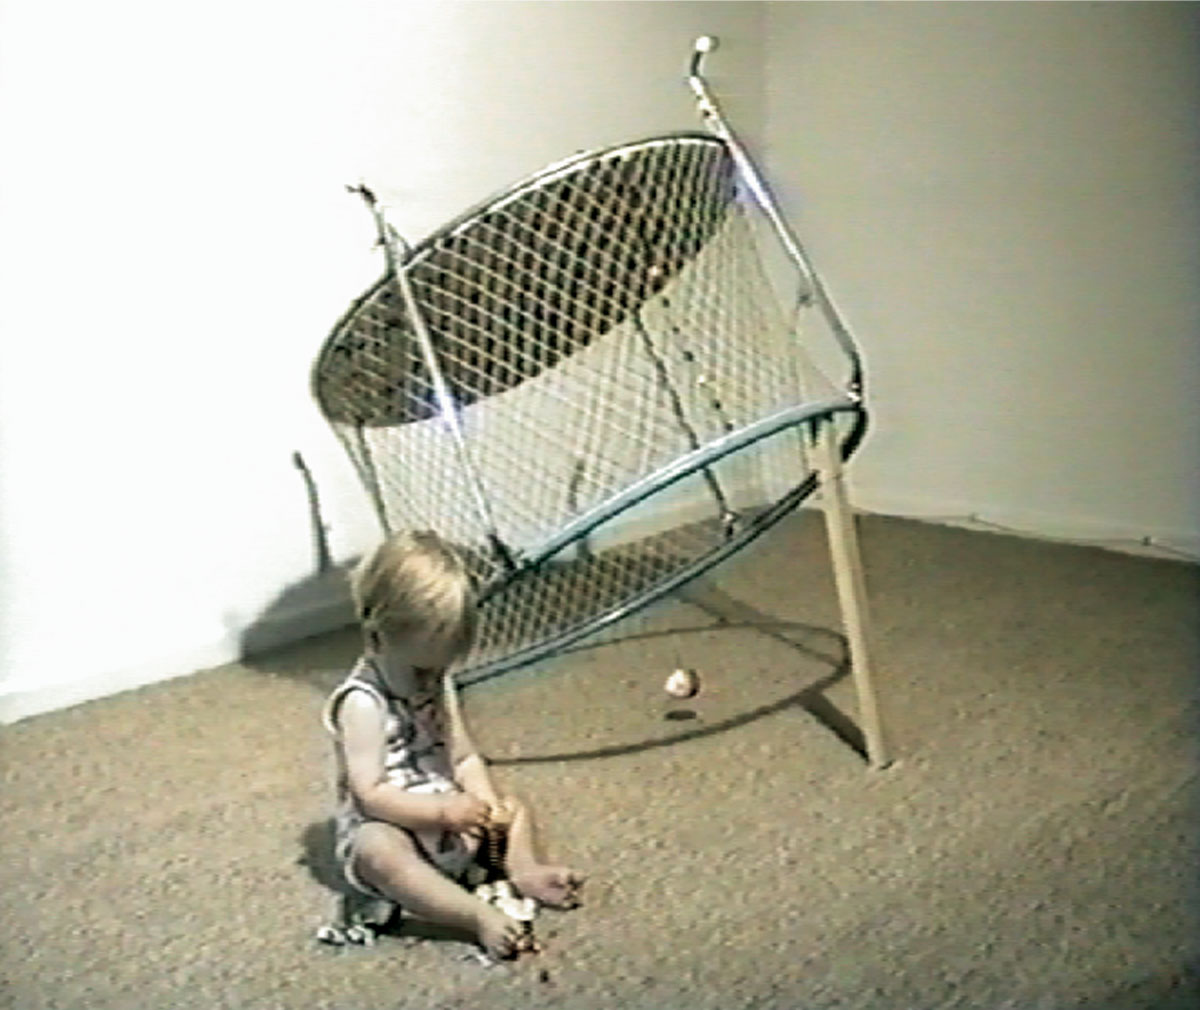 Stills from a 1992 video by artist Carsten Höller entitled “Jenny held her little daughter twenty minutes under water, not to cause her any trouble, just to see the funny bubbles.”